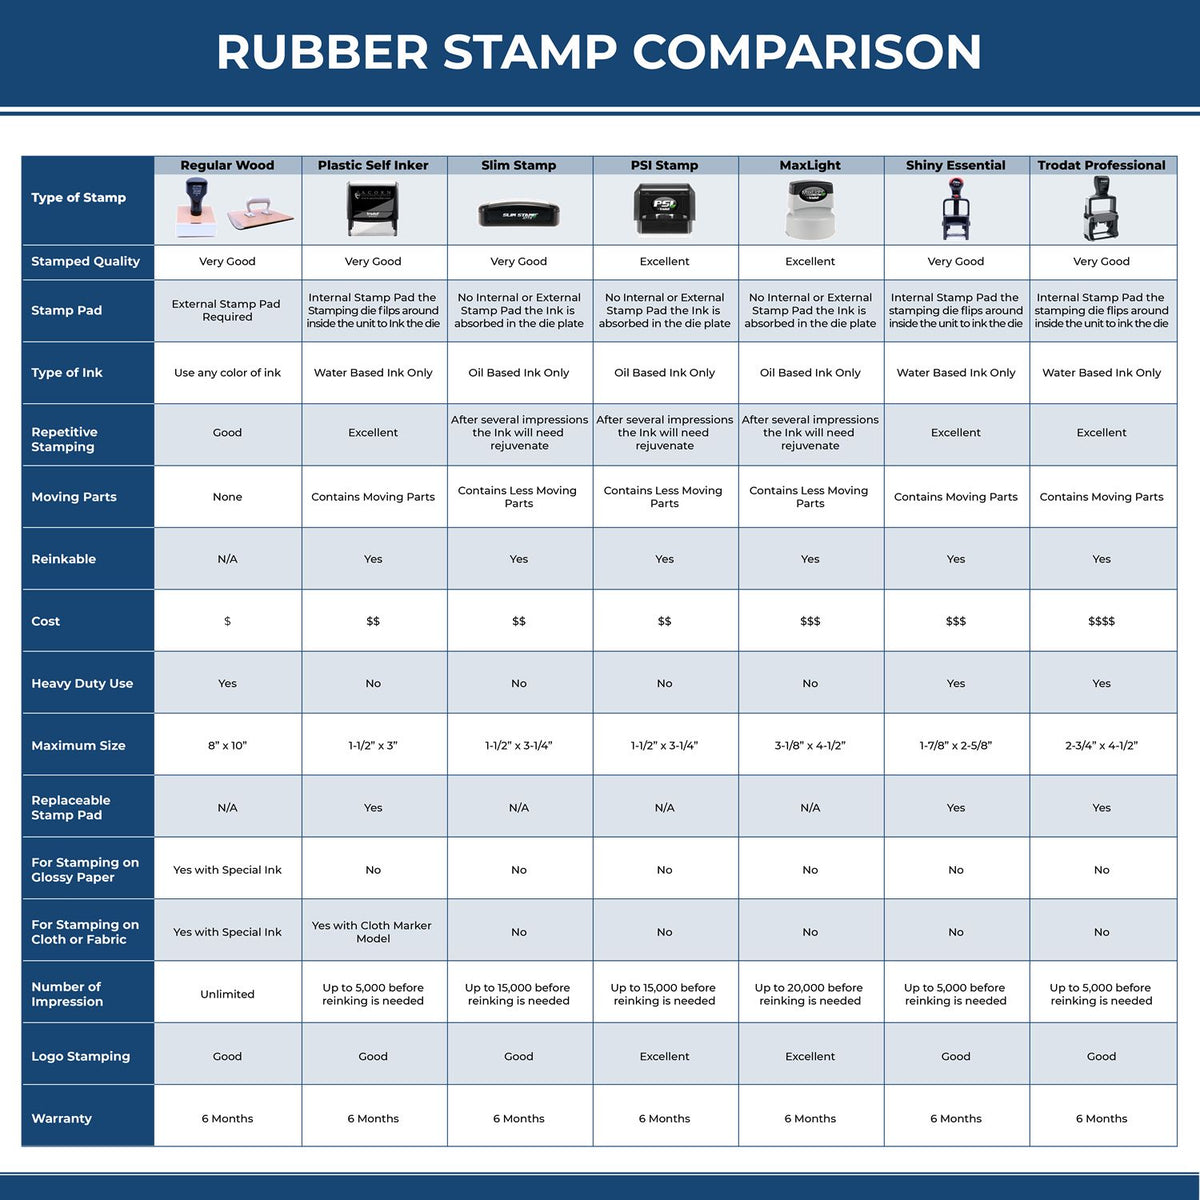 A comparison chart for the different types of mount models available for the Slim Pre-Inked Guam Architect Seal Stamp.